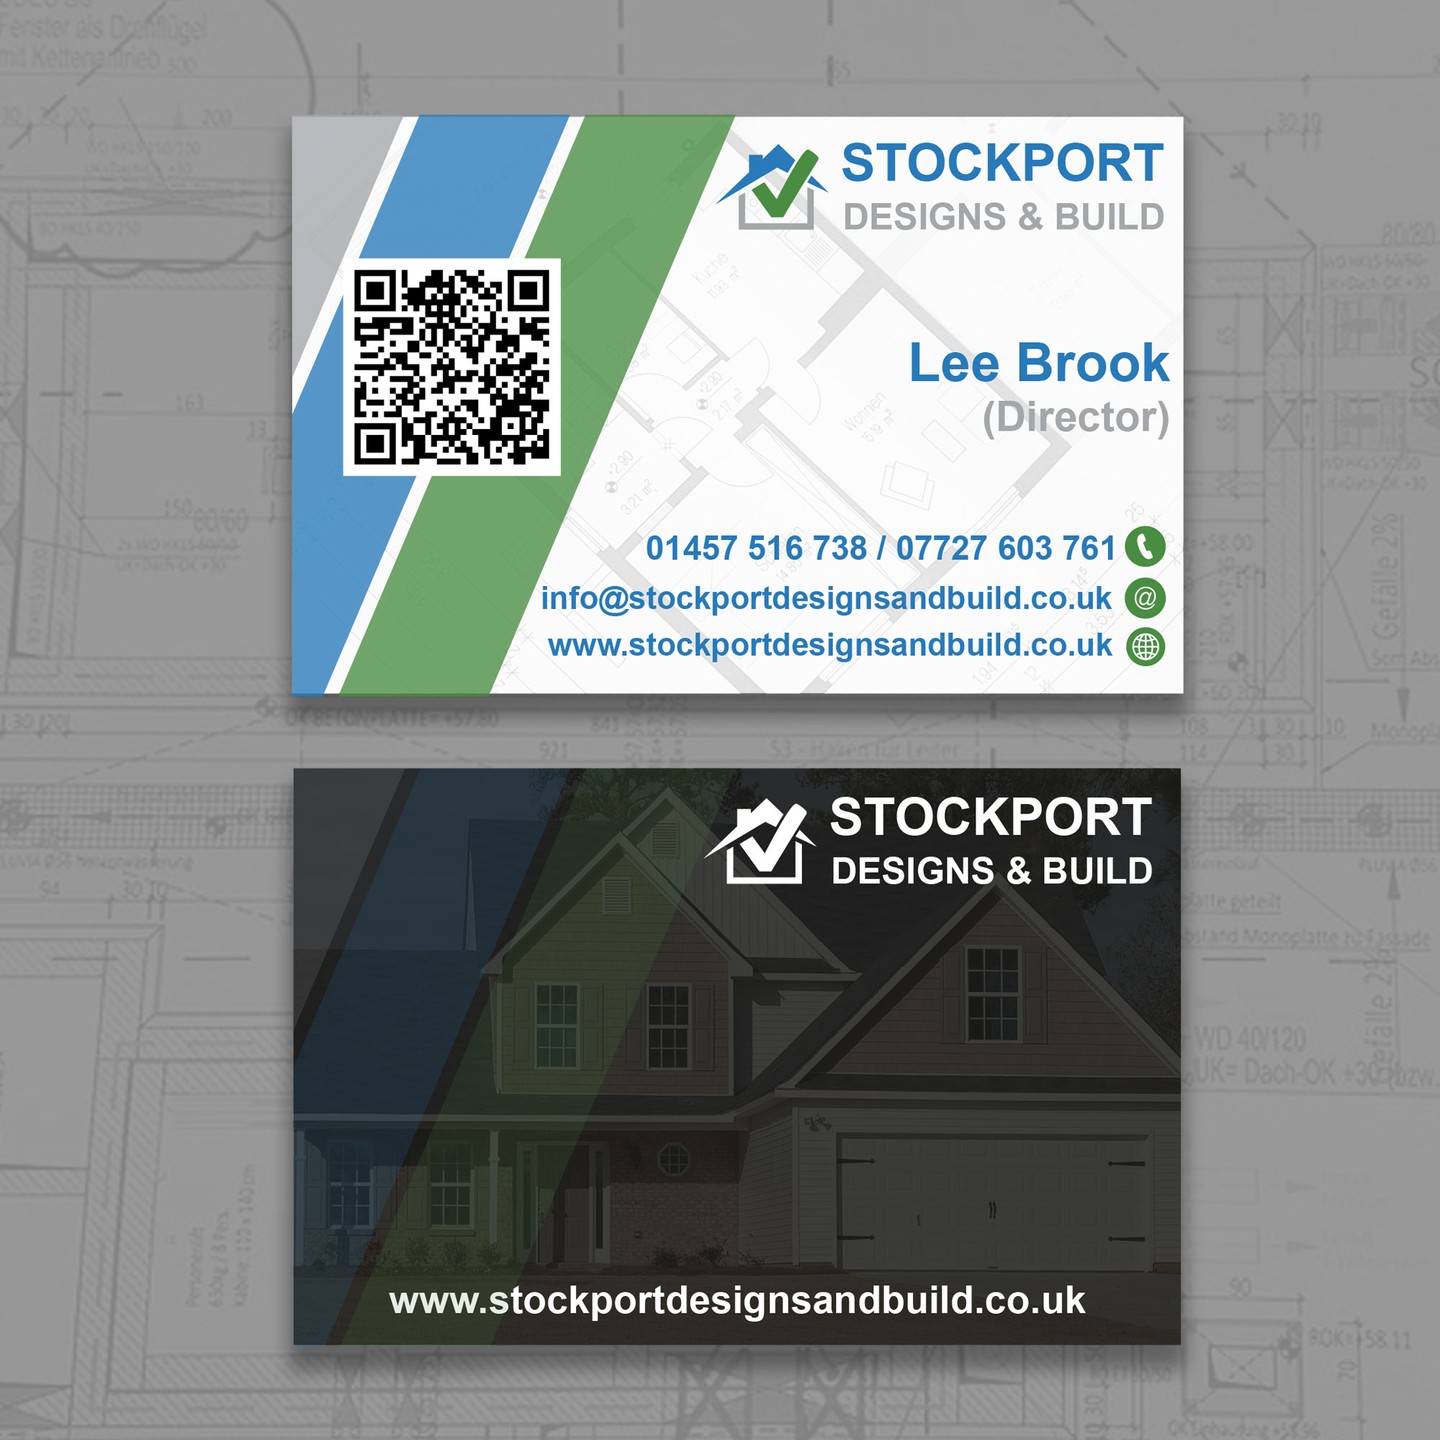 Stockport-designs-and-builds-bus.jpeg